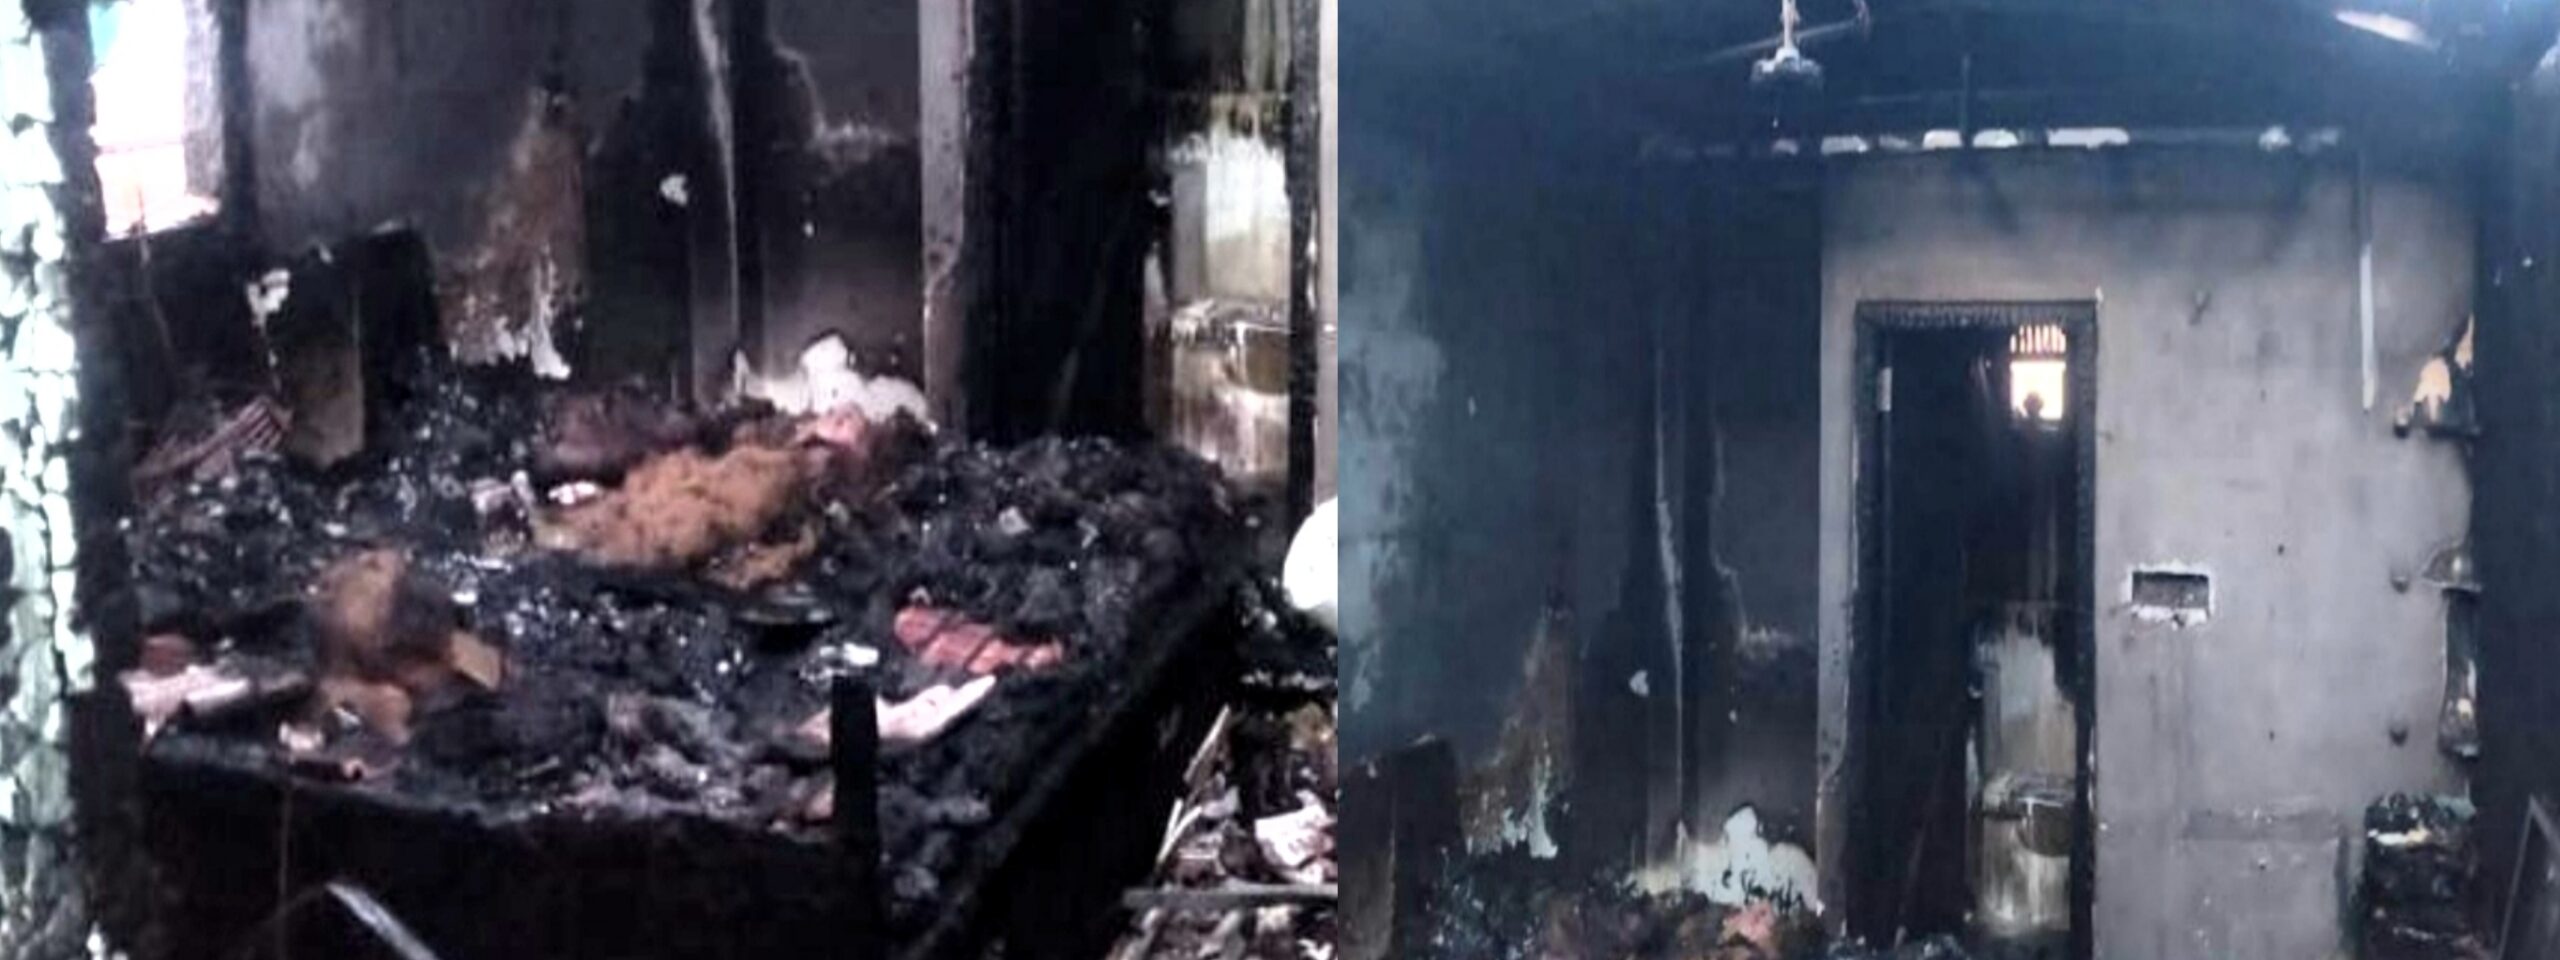 fierce-fire-broke-out-in-the-third-floor-room-goods-worth-lakhs-burnt